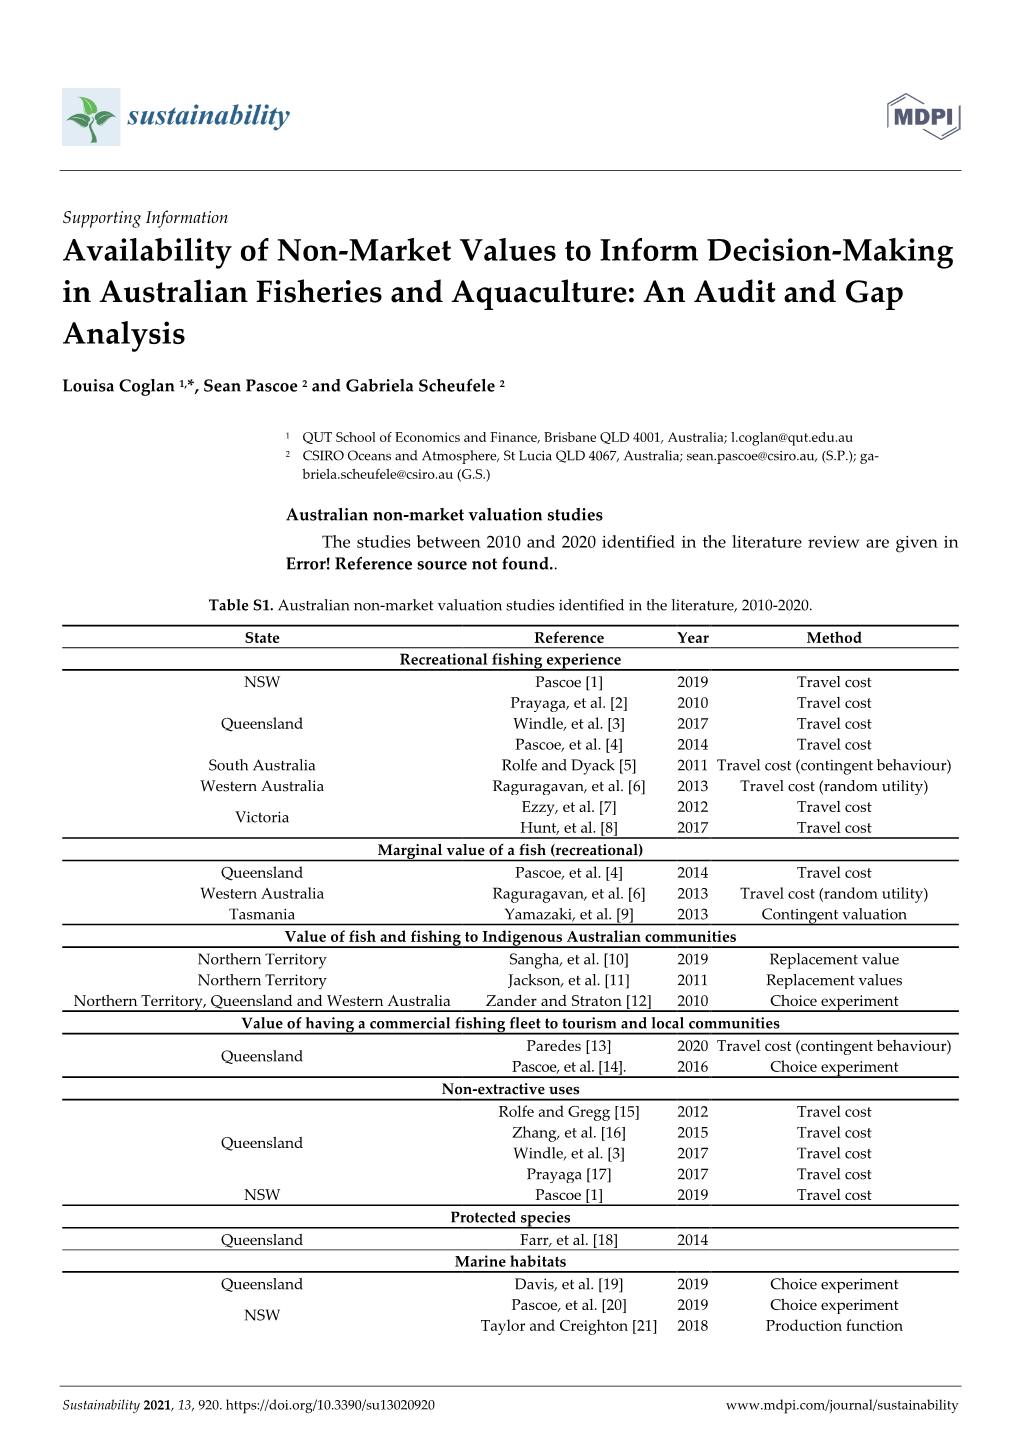 Availability of Non-Market Values to Inform Decision-Making in Australian Fisheries and Aquaculture: an Audit and Gap Analysis